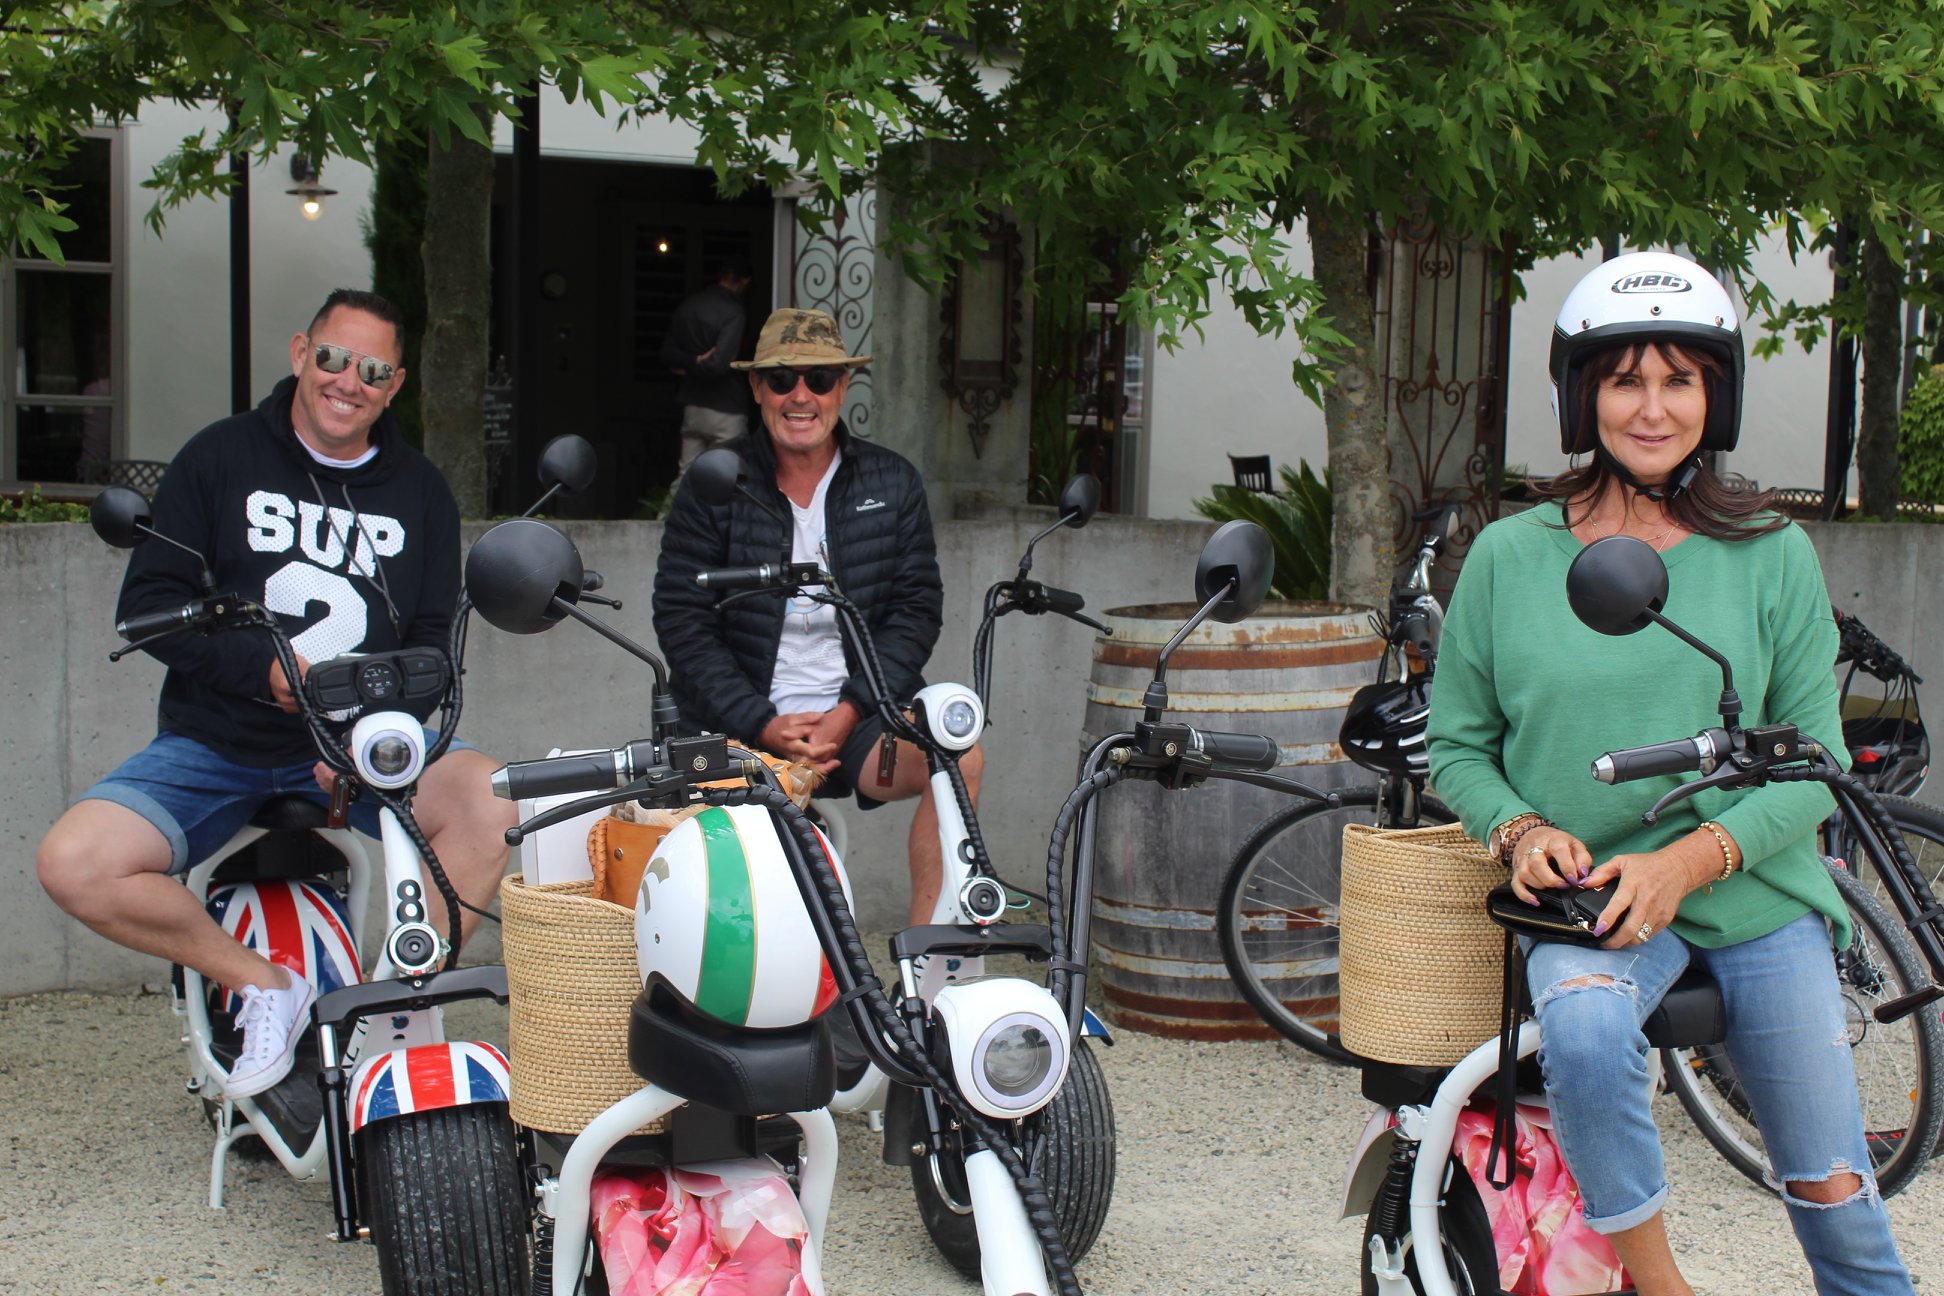 Travel in style & explore the vineyards of Martinborough with Peonies Cruisers!